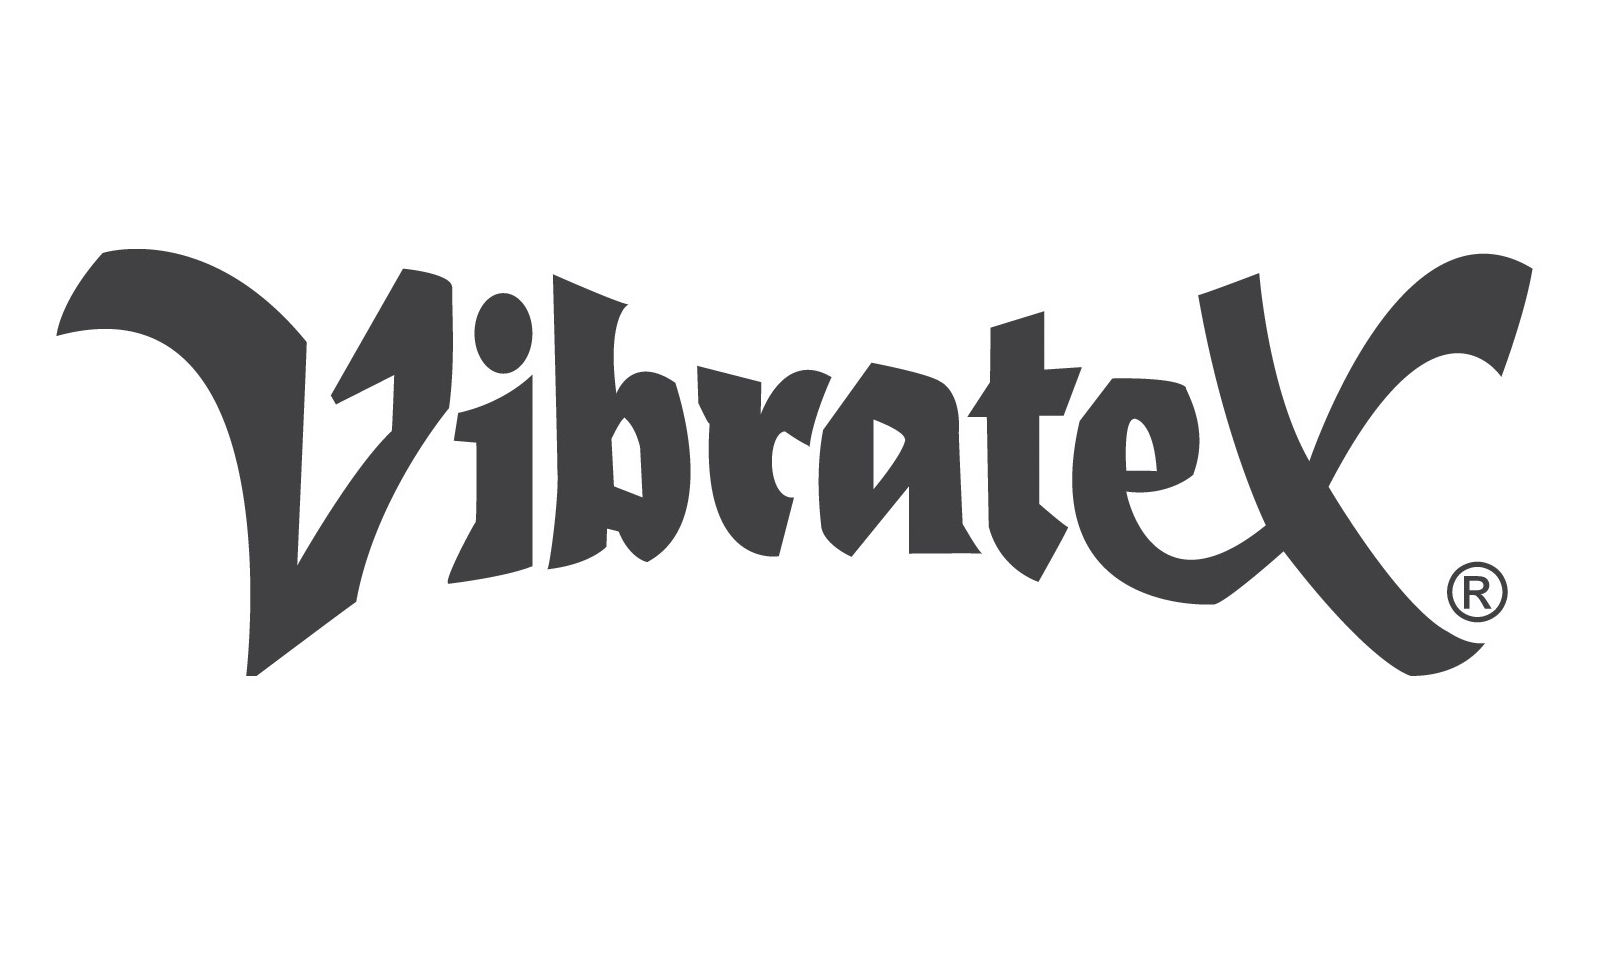 Emily Morse To Appear In Vibratex Booth At Trade Show